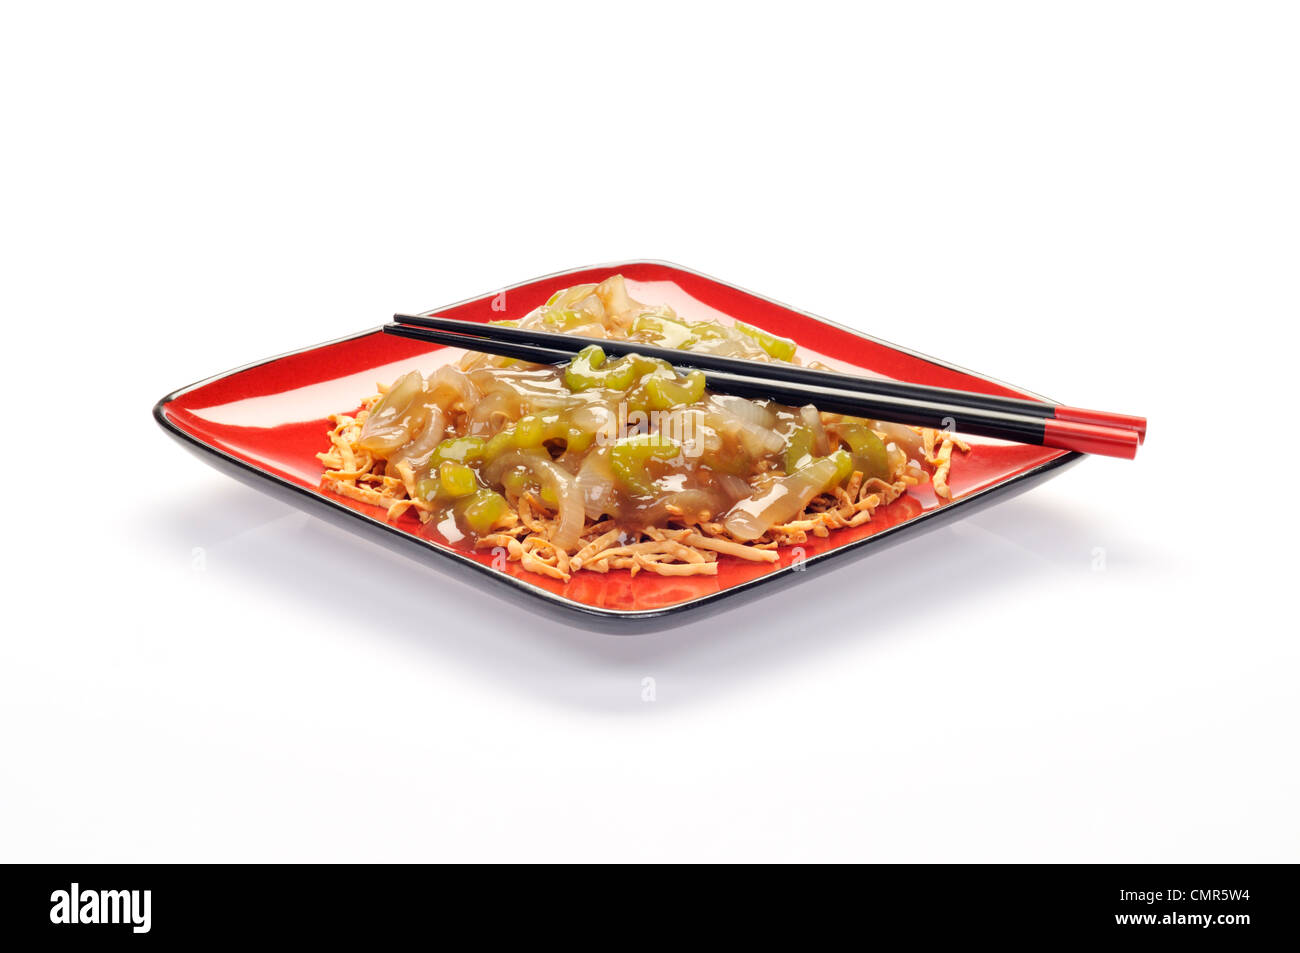 Plate of Chinese vegetable chow mein on red plate with chopsticks Stock Photo